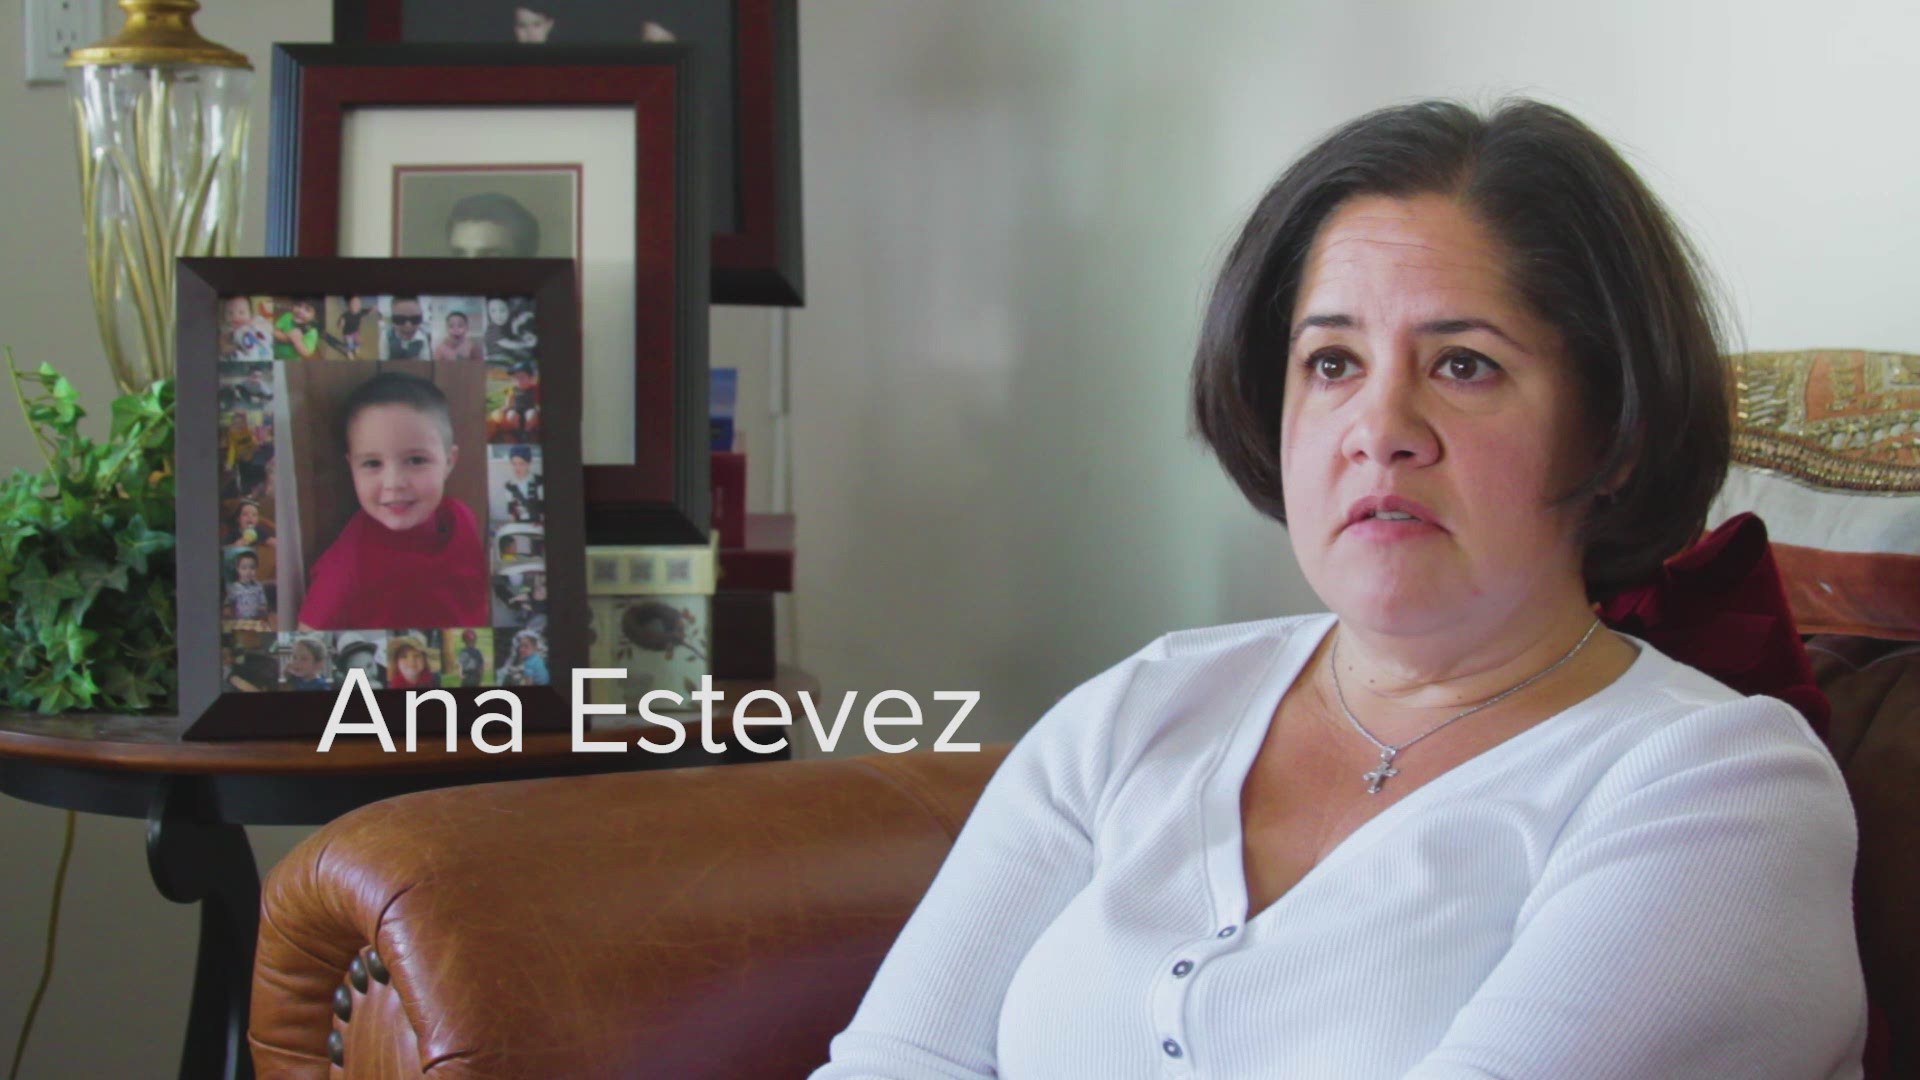 For the past year, Ana Estevez has been increasing her advocacy work, meeting with members of Congress and California lawmakers, pushing for a resolution named after her son, who was murdered by his own father.